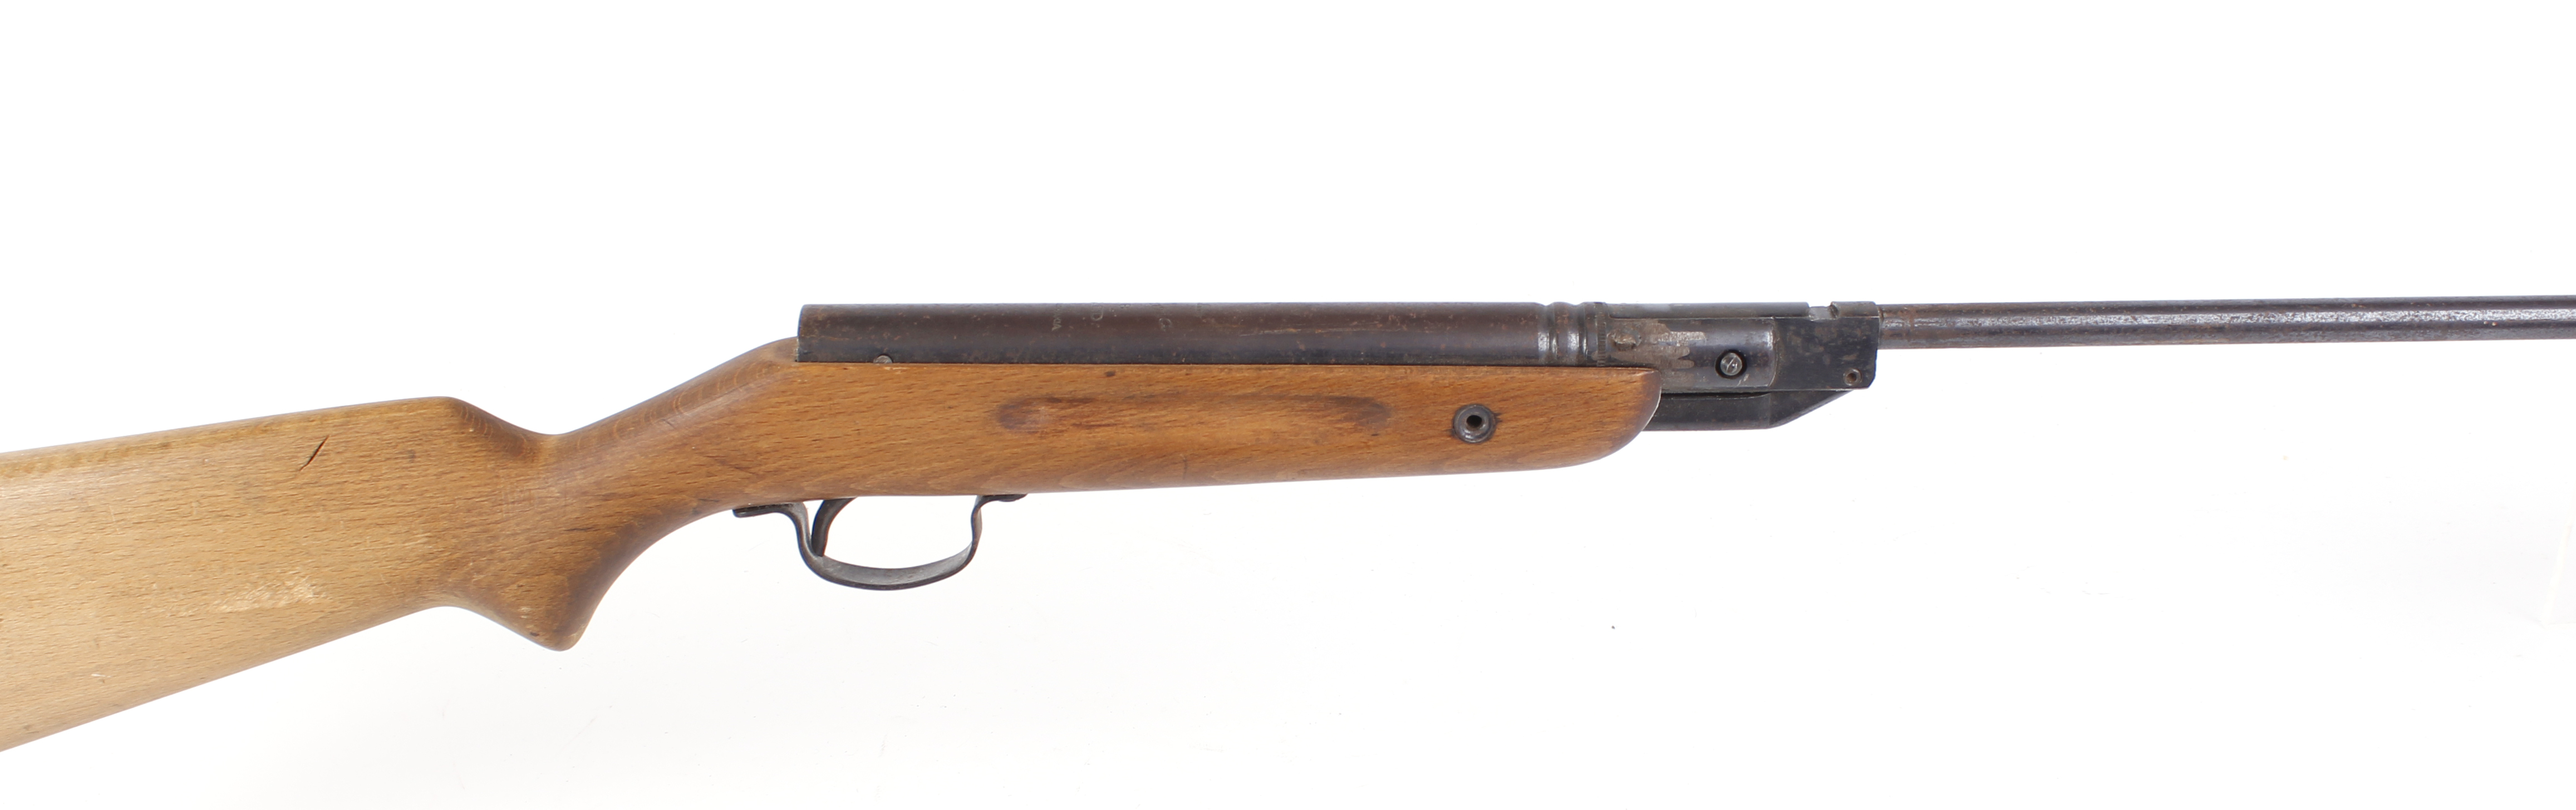 .177 Relum Slavia 618 break barrel air rifle [Purchasers Please Note: Collections Tuesday 18th &